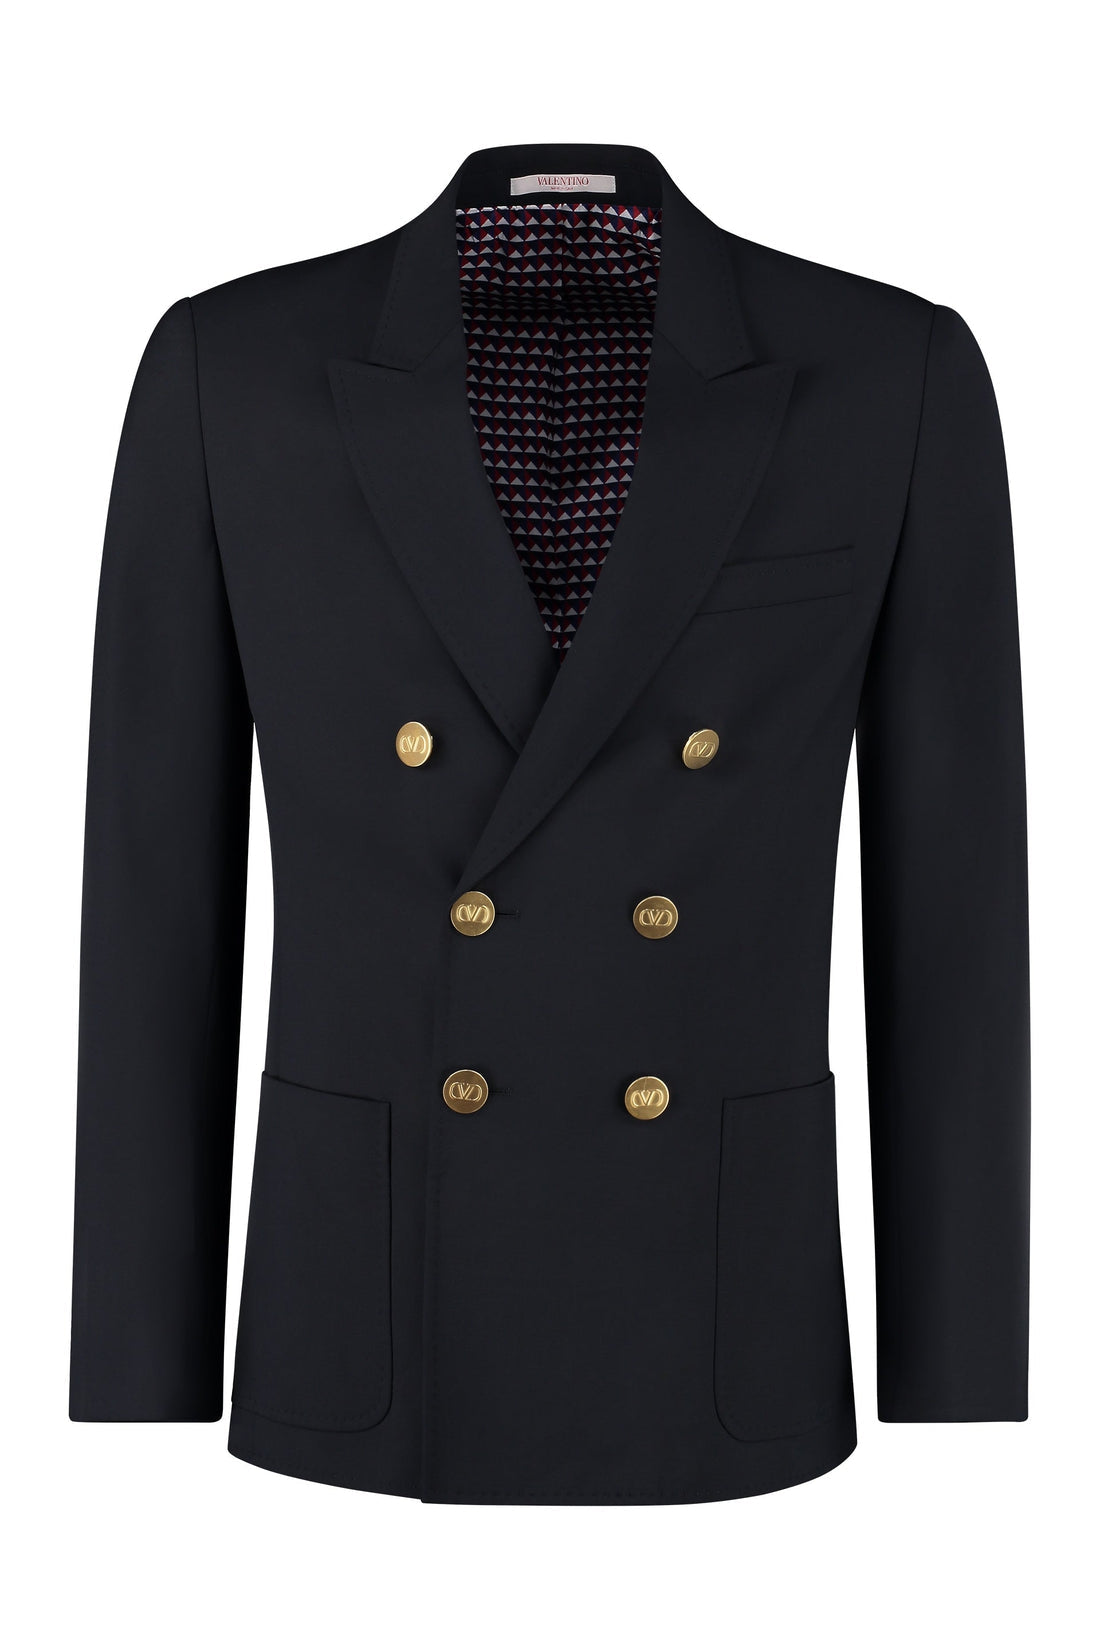 Valentino-OUTLET-SALE-Wool blend double-breasted jacket-ARCHIVIST